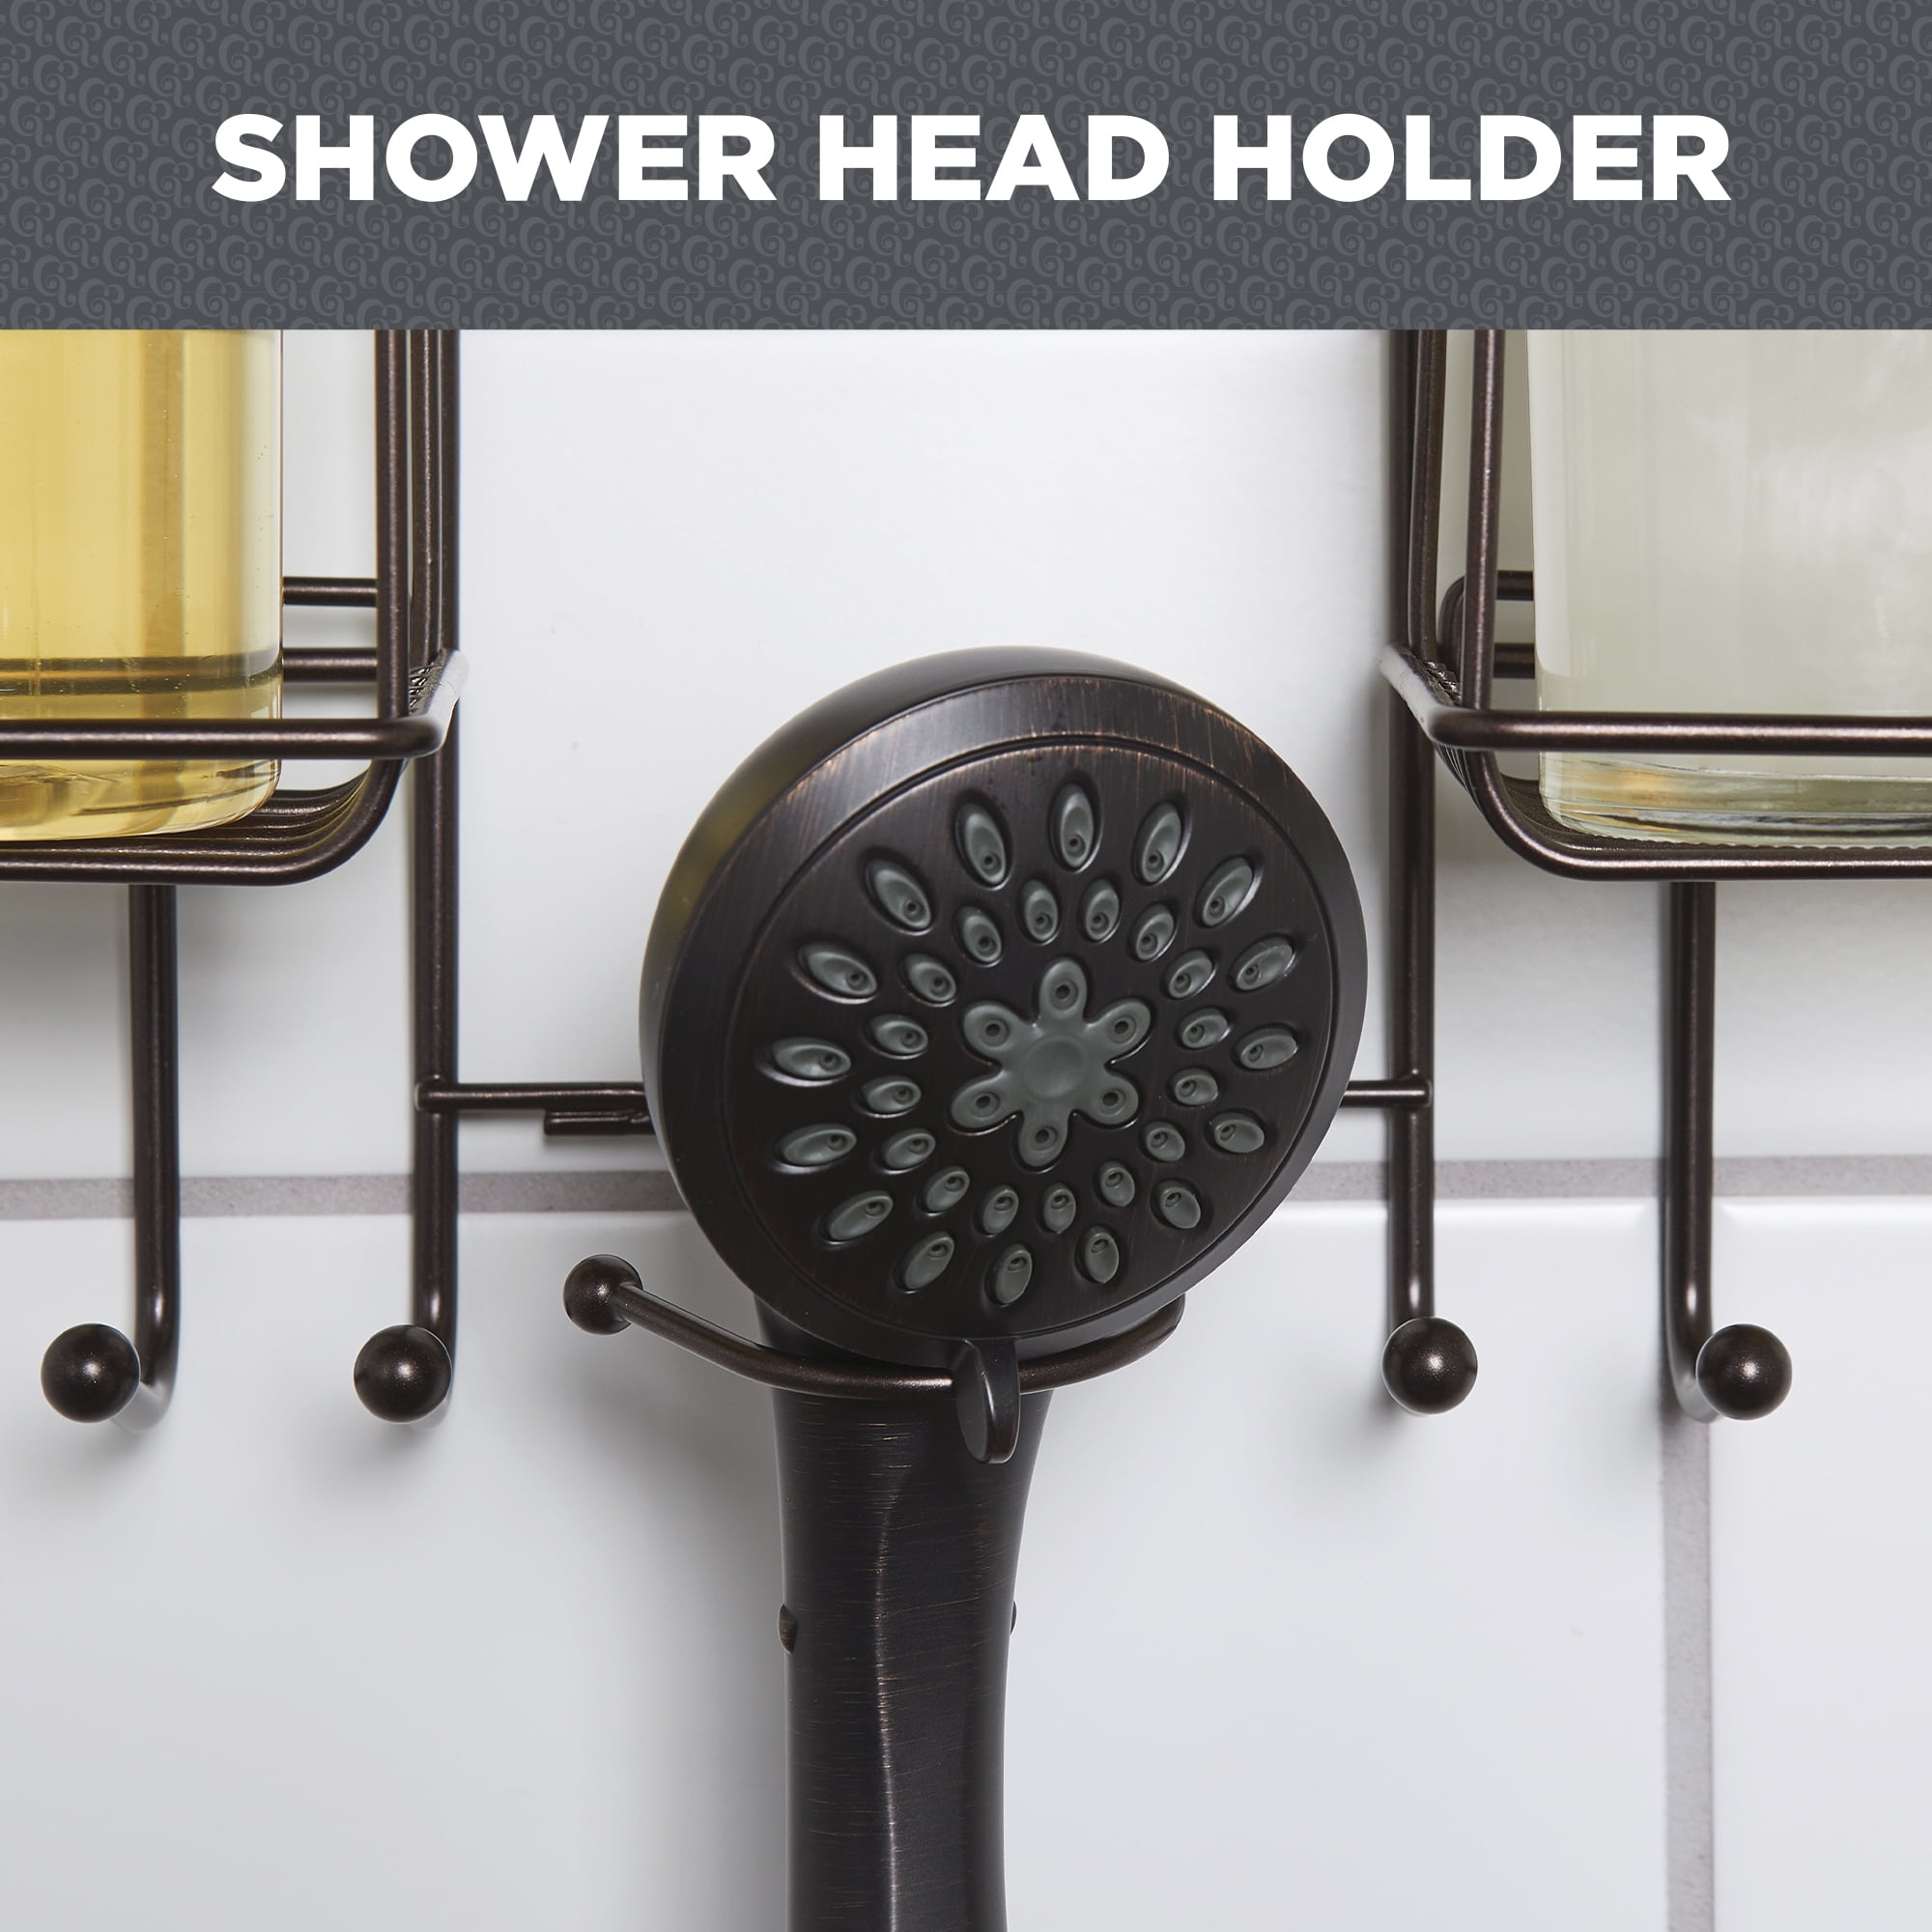 Shower Shelving Options from Improveit Home Remodeling